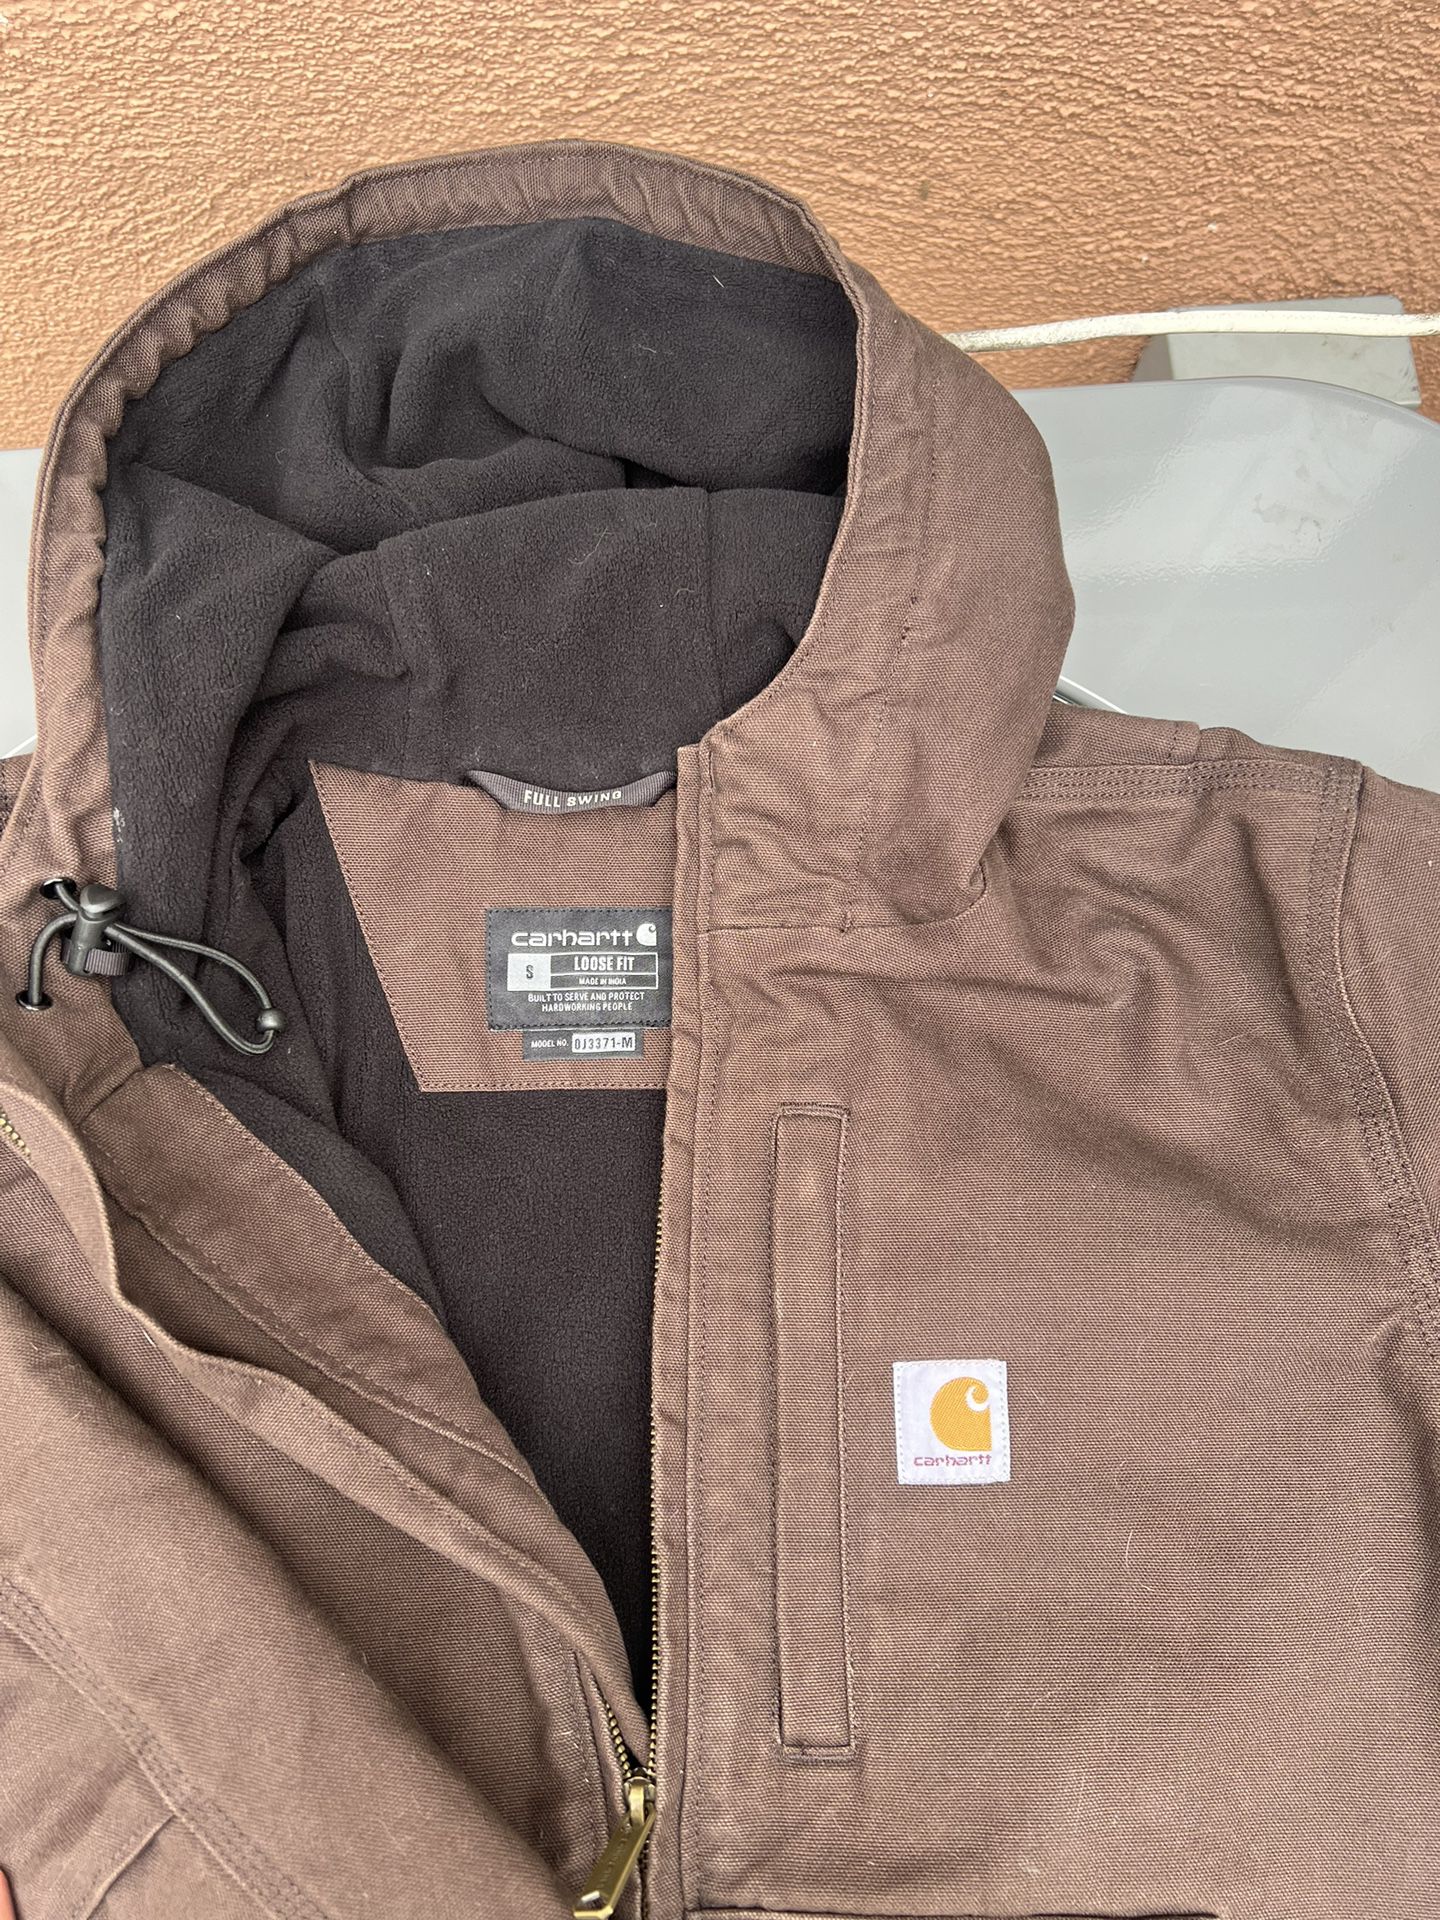 Carhartt Full Swing Jacket, Duck Insulated Sleeve, Brown, Small Size